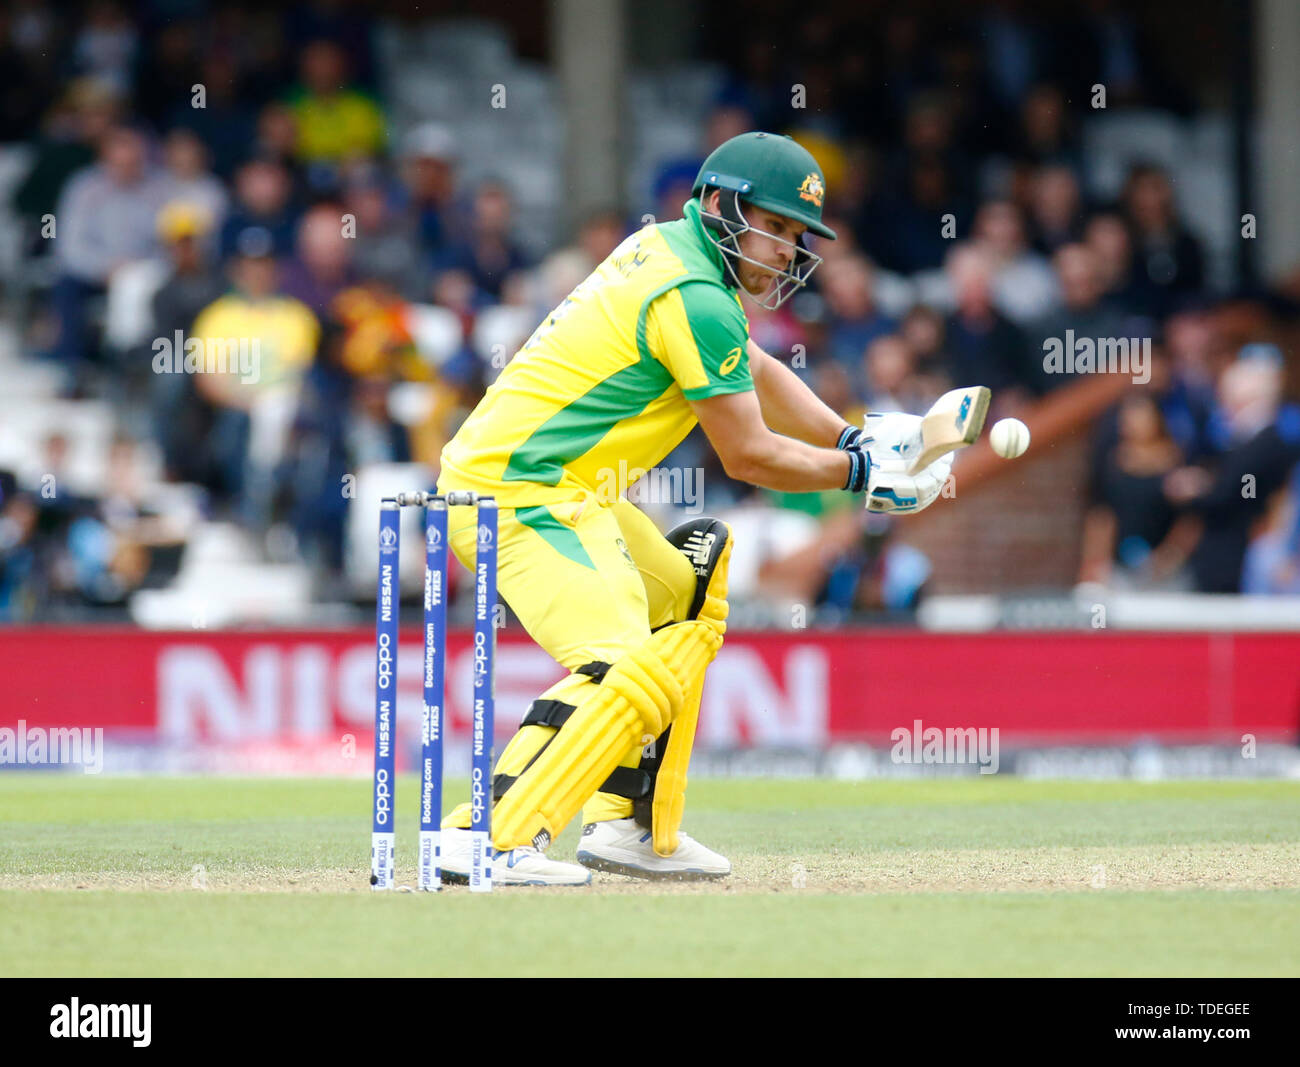 London, UK. 15th June, 2019. LONDON, England. June 15: Aaron Finch of Australia during ICC Cricket World Cup between Sri Lanka and Australia at the Oval Stadium on 15 June 2019 in London, England. Credit: Action Foto Sport/Alamy Live News Stock Photo